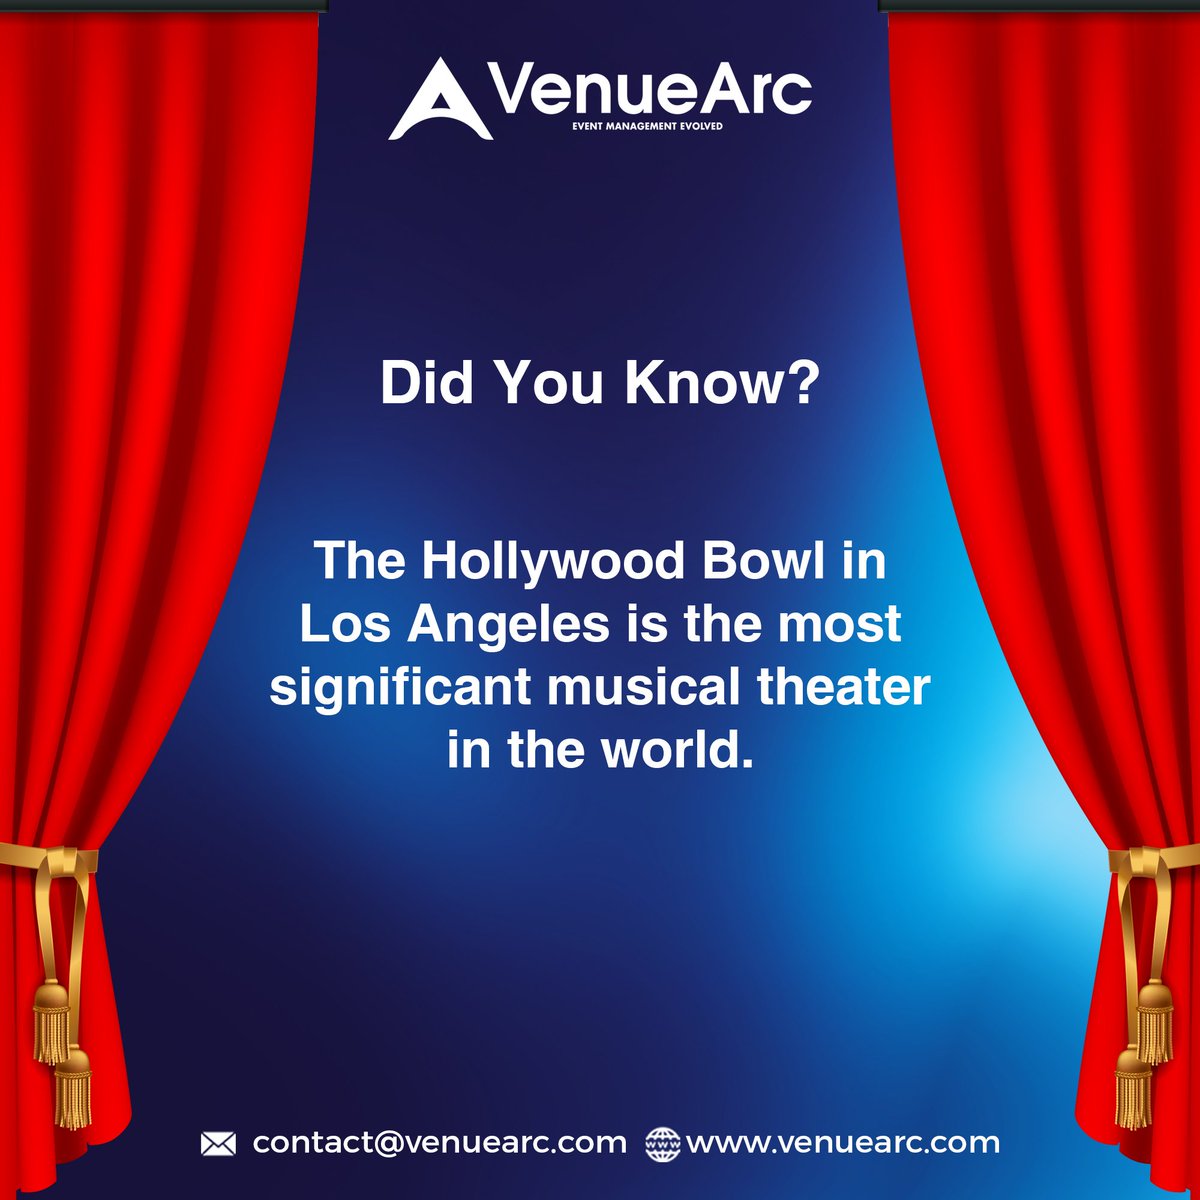 The Hollywood Bowl in Los Angeles, with the world-famous Hollywood sign in the background, is the world's most significant operational open-air theatre, with a capacity of 17,500.

#eventbooking #eventmanagement #performingarts #eventplanner #events #venues #performance